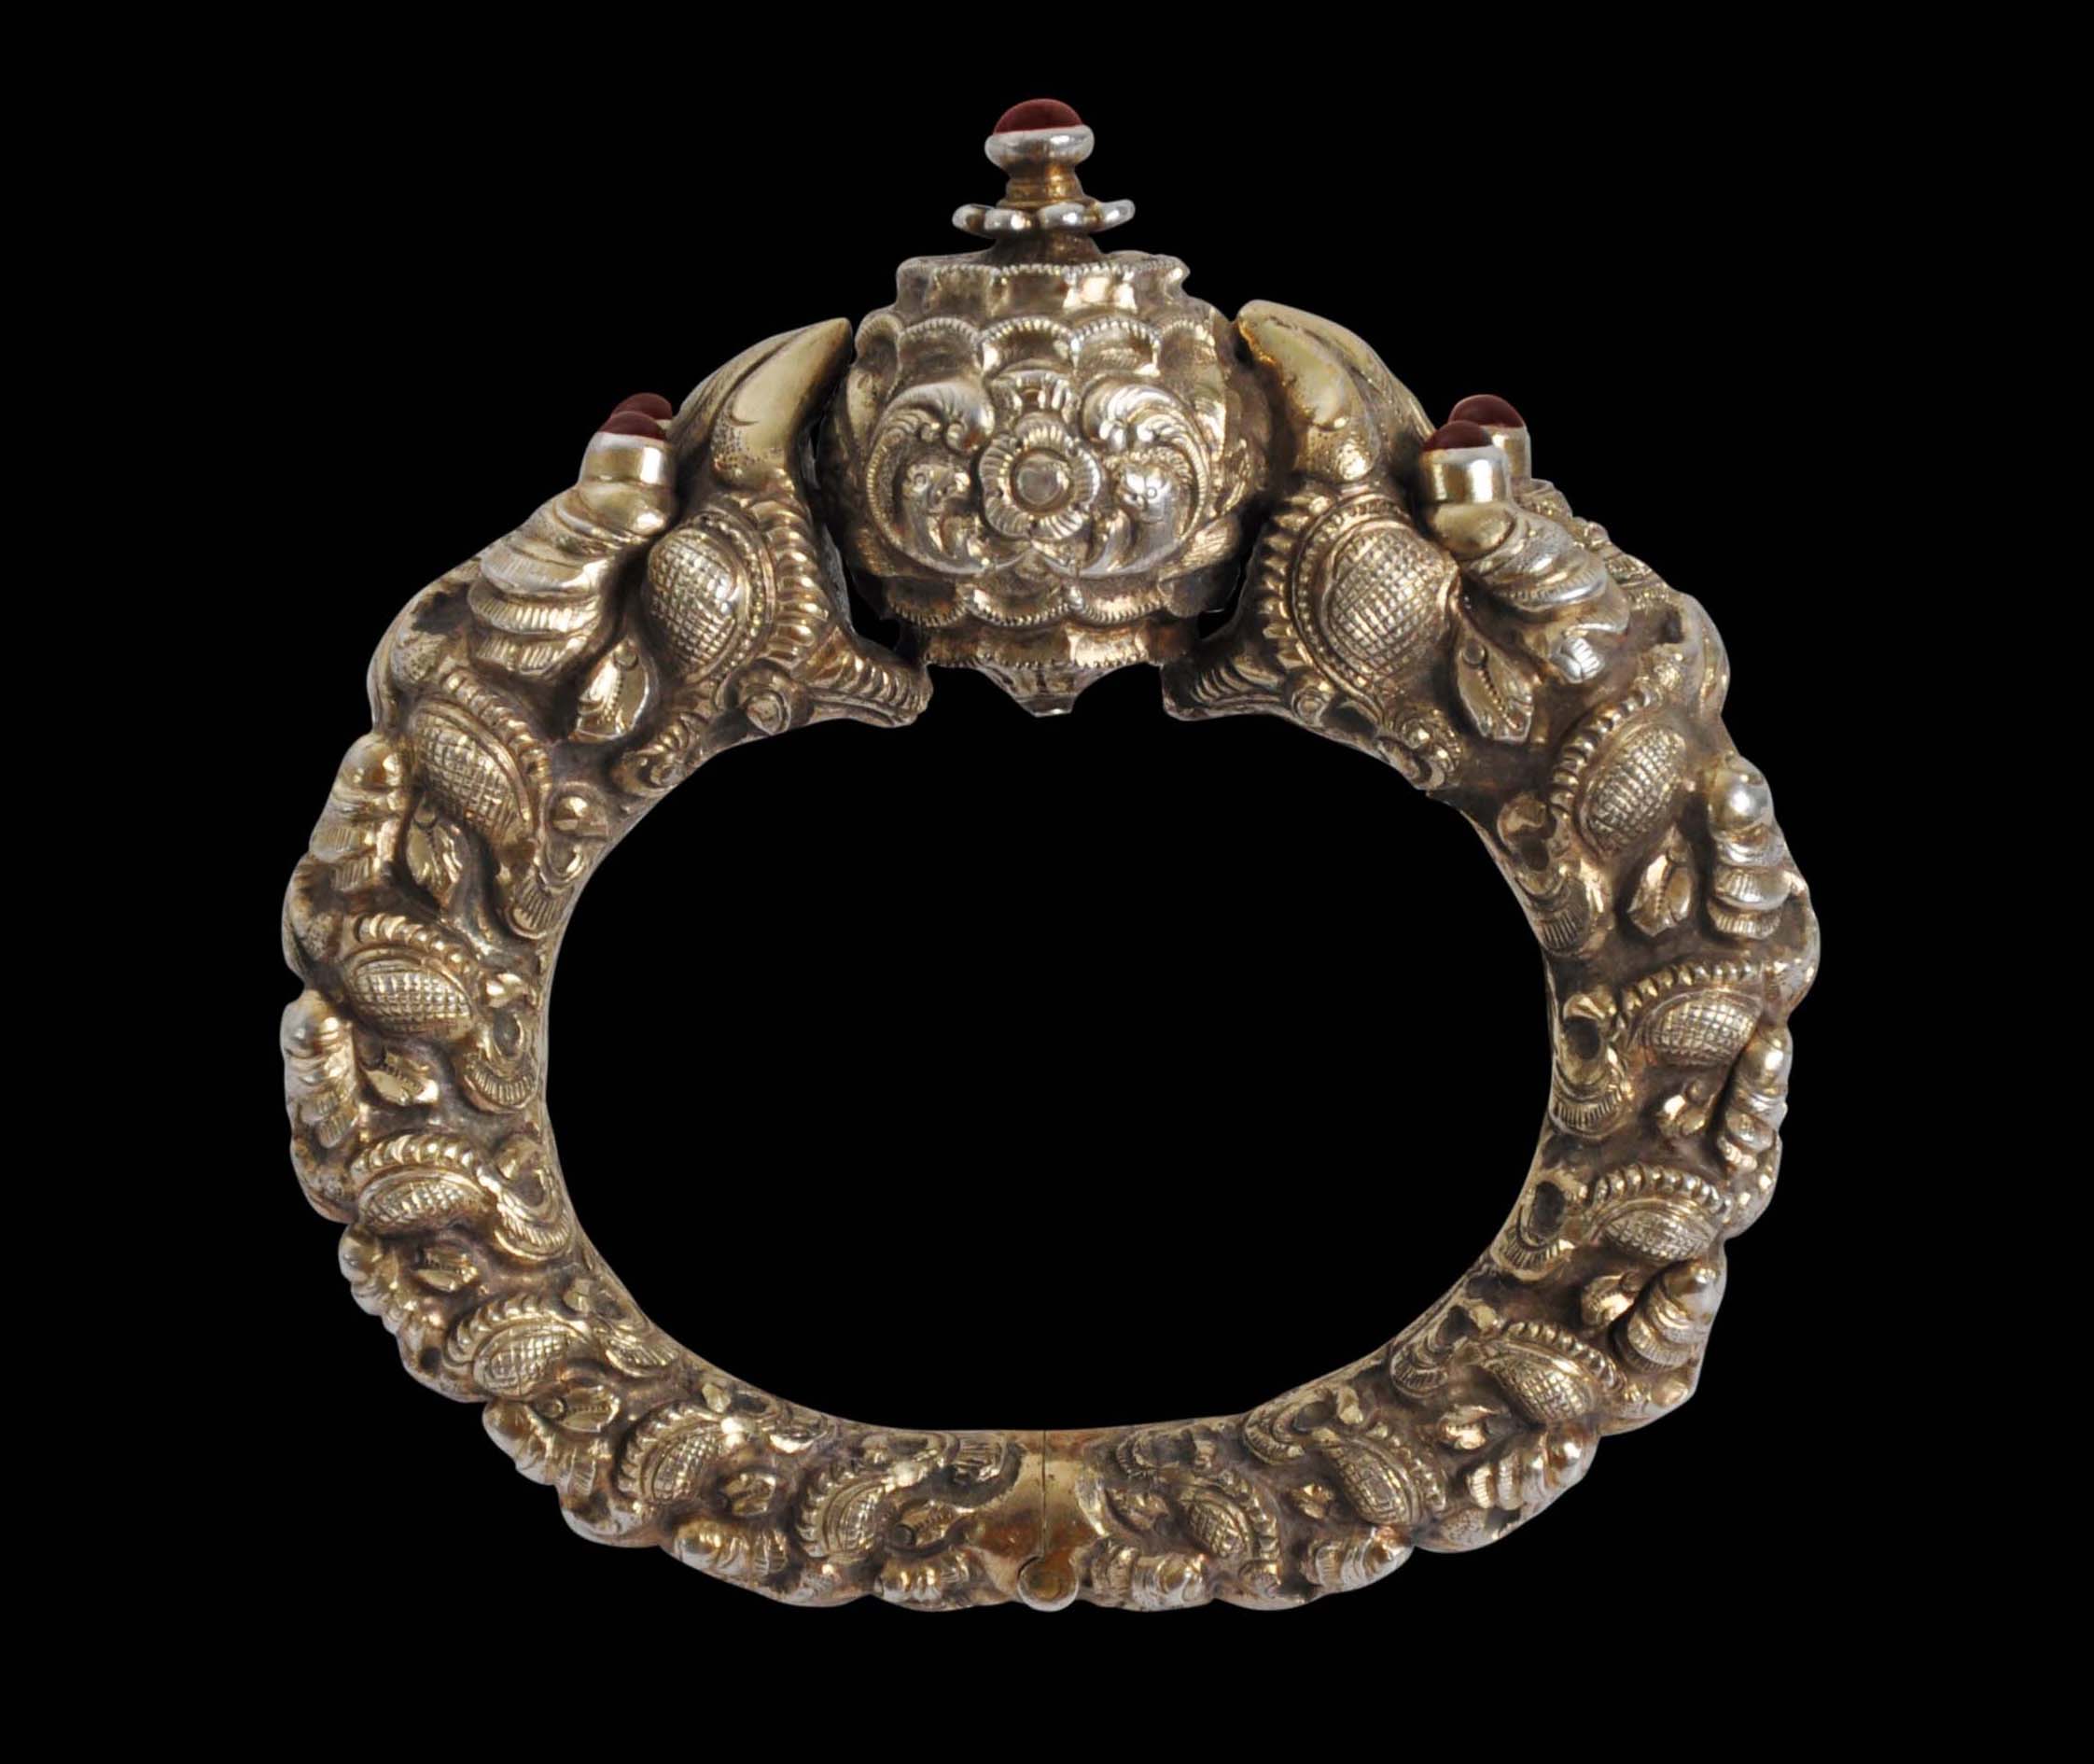 Roseberys London | An early 20th century Chinese silver-gilt bracelet with